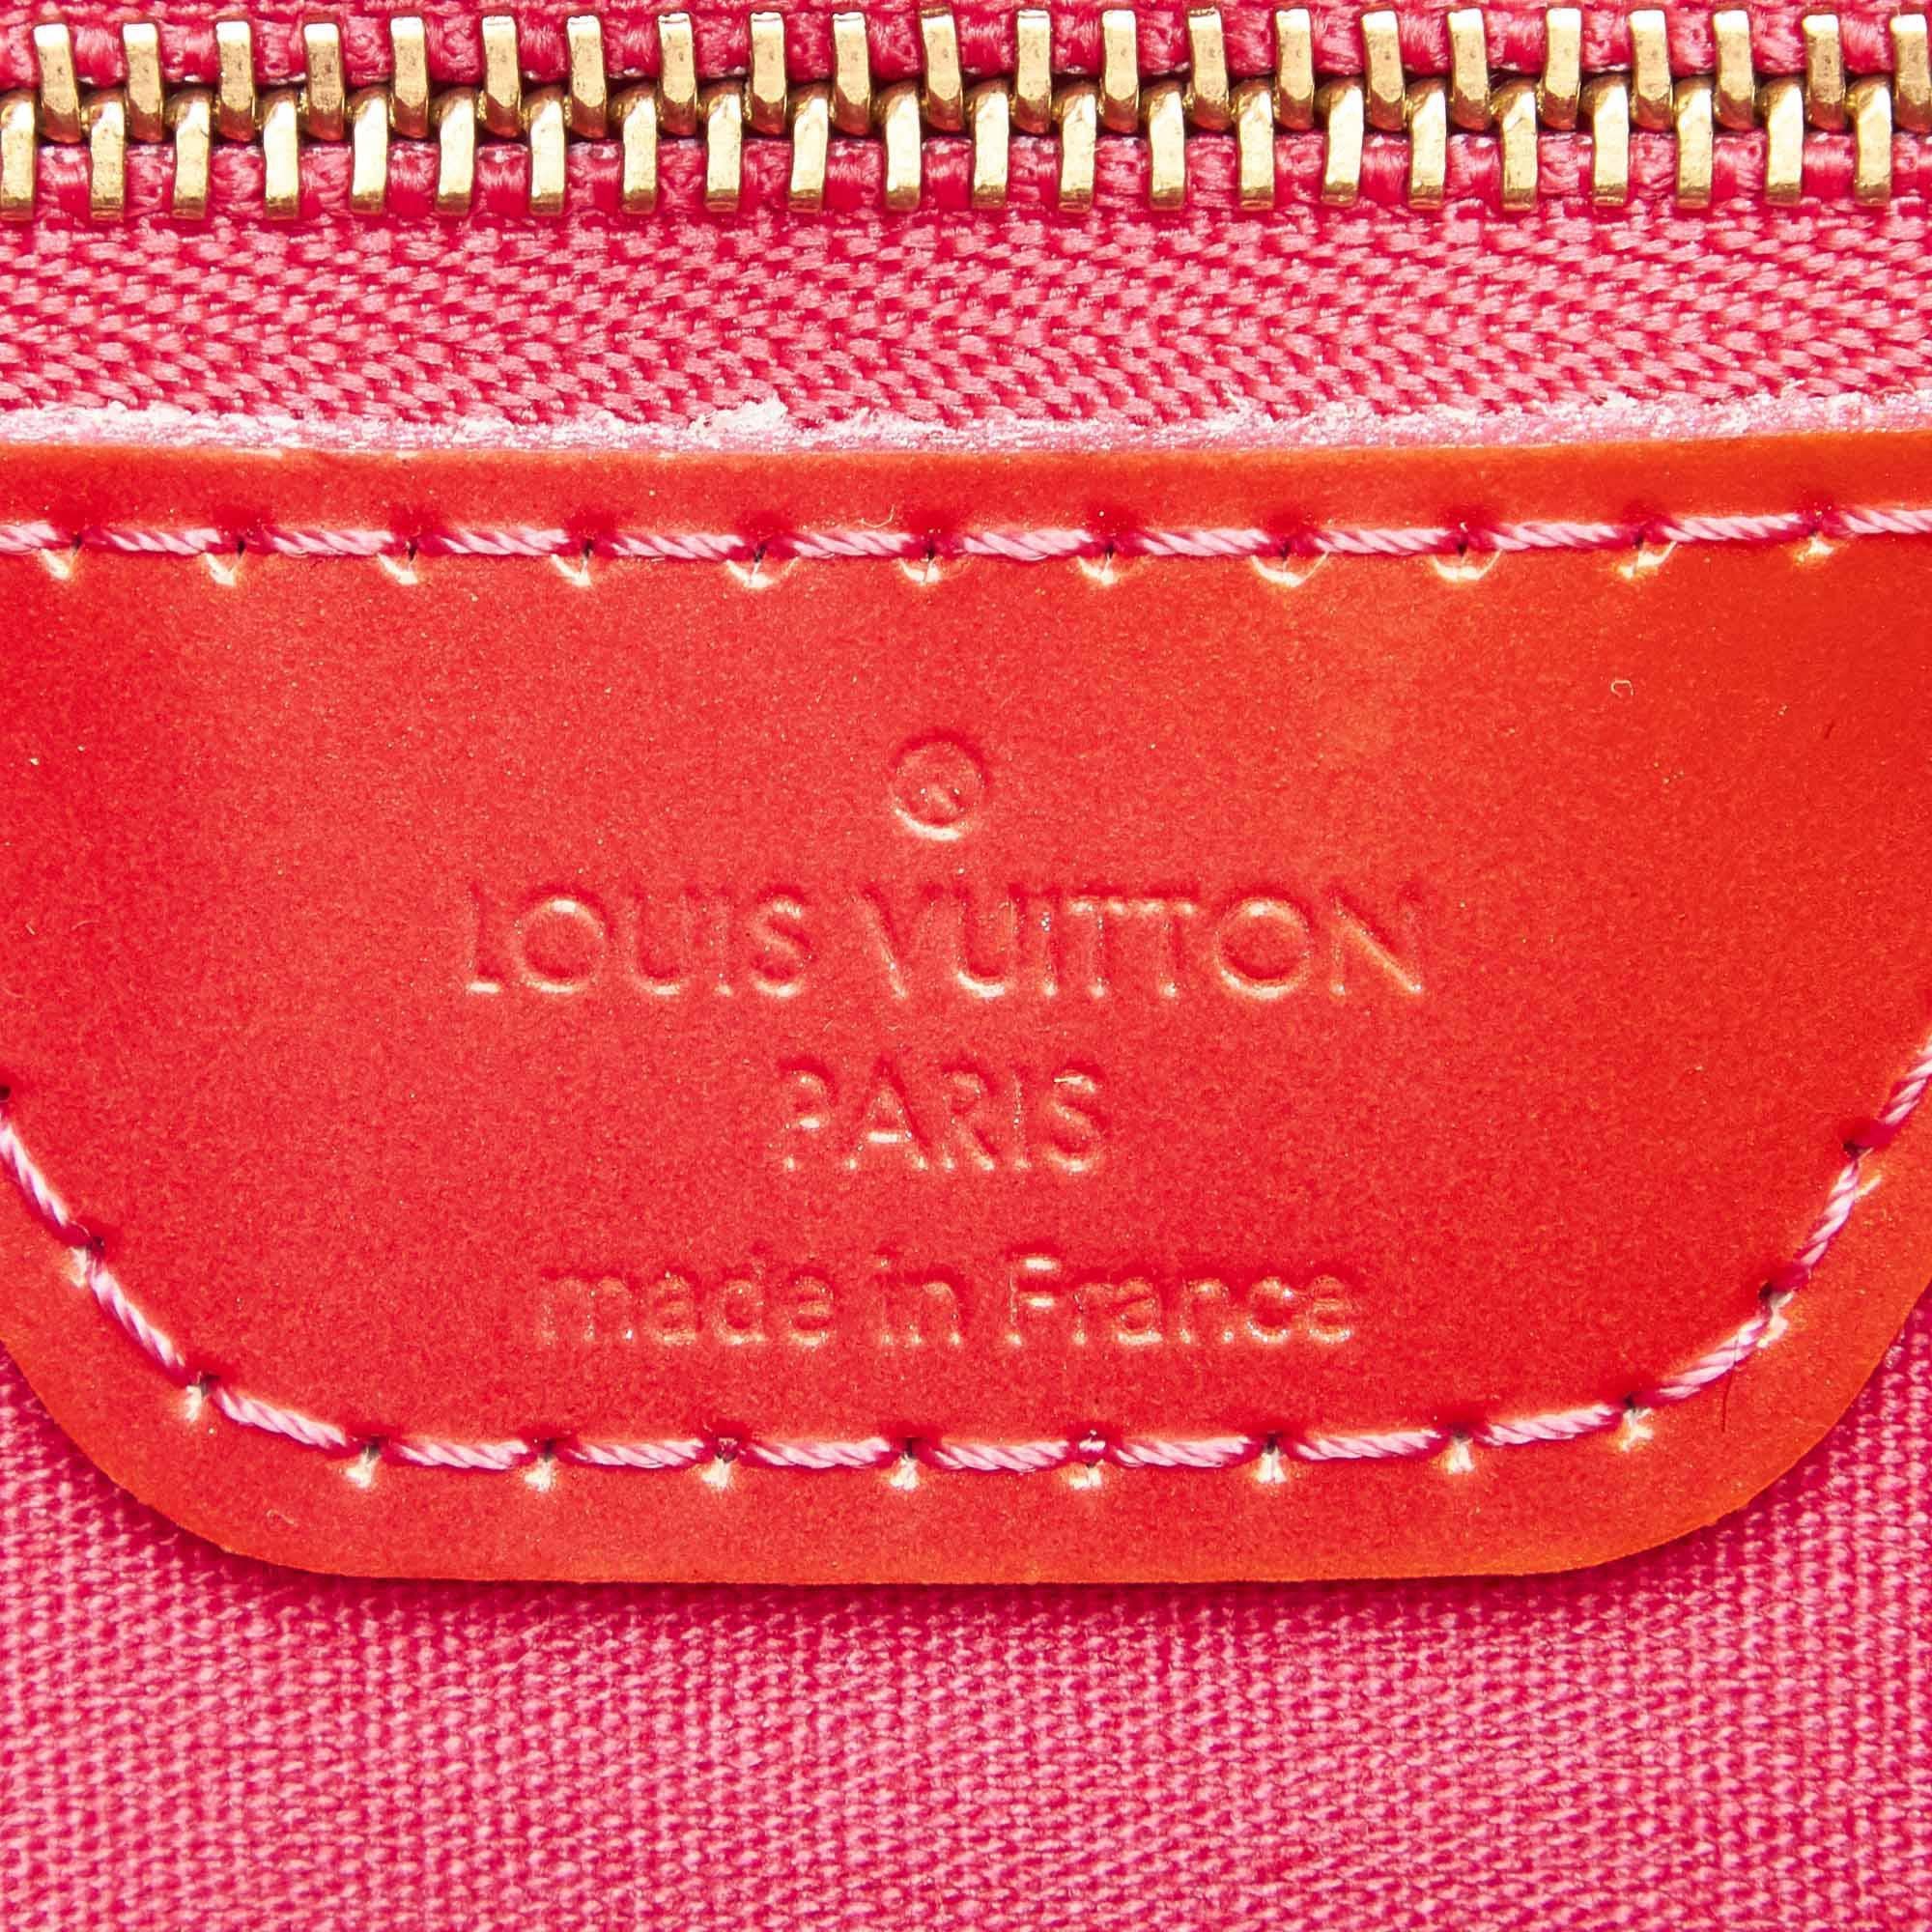 Orange Louis Vuitton Red Patent Leather Bag For Sale